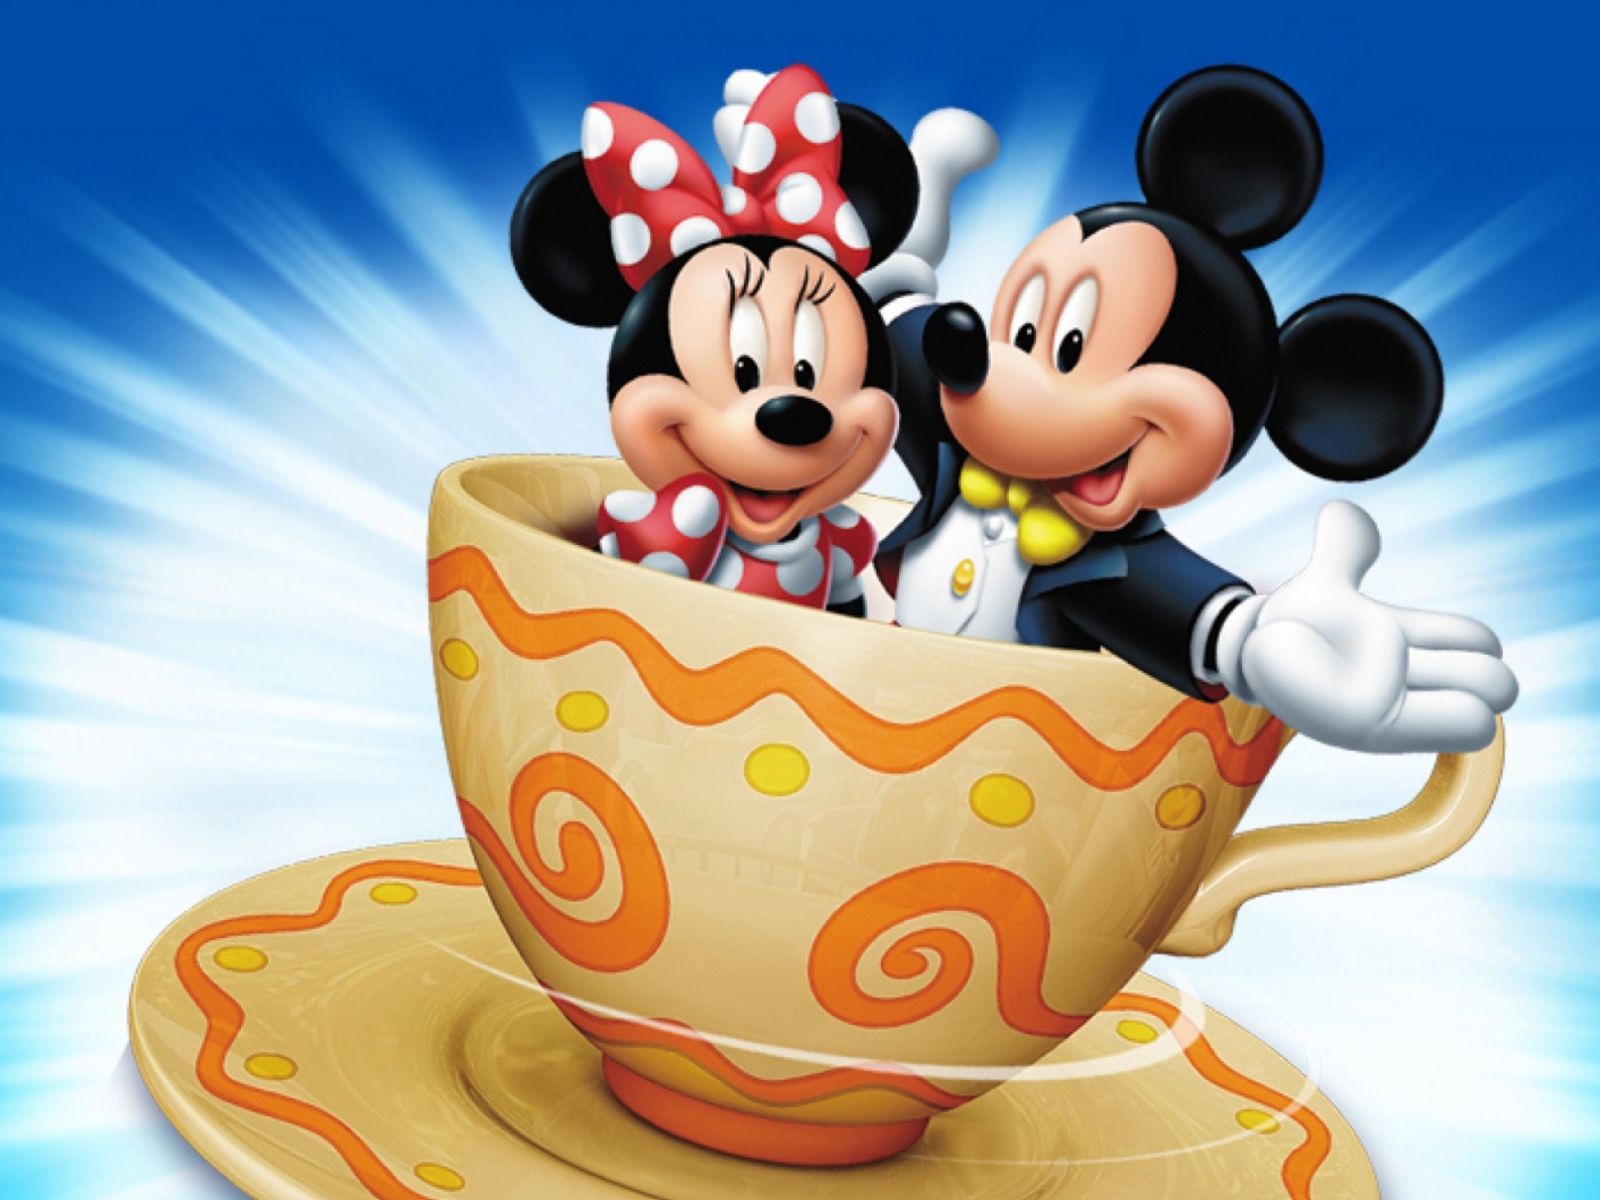 Mickey And Minnie Mouse In Cup wallpaper 1600x1200